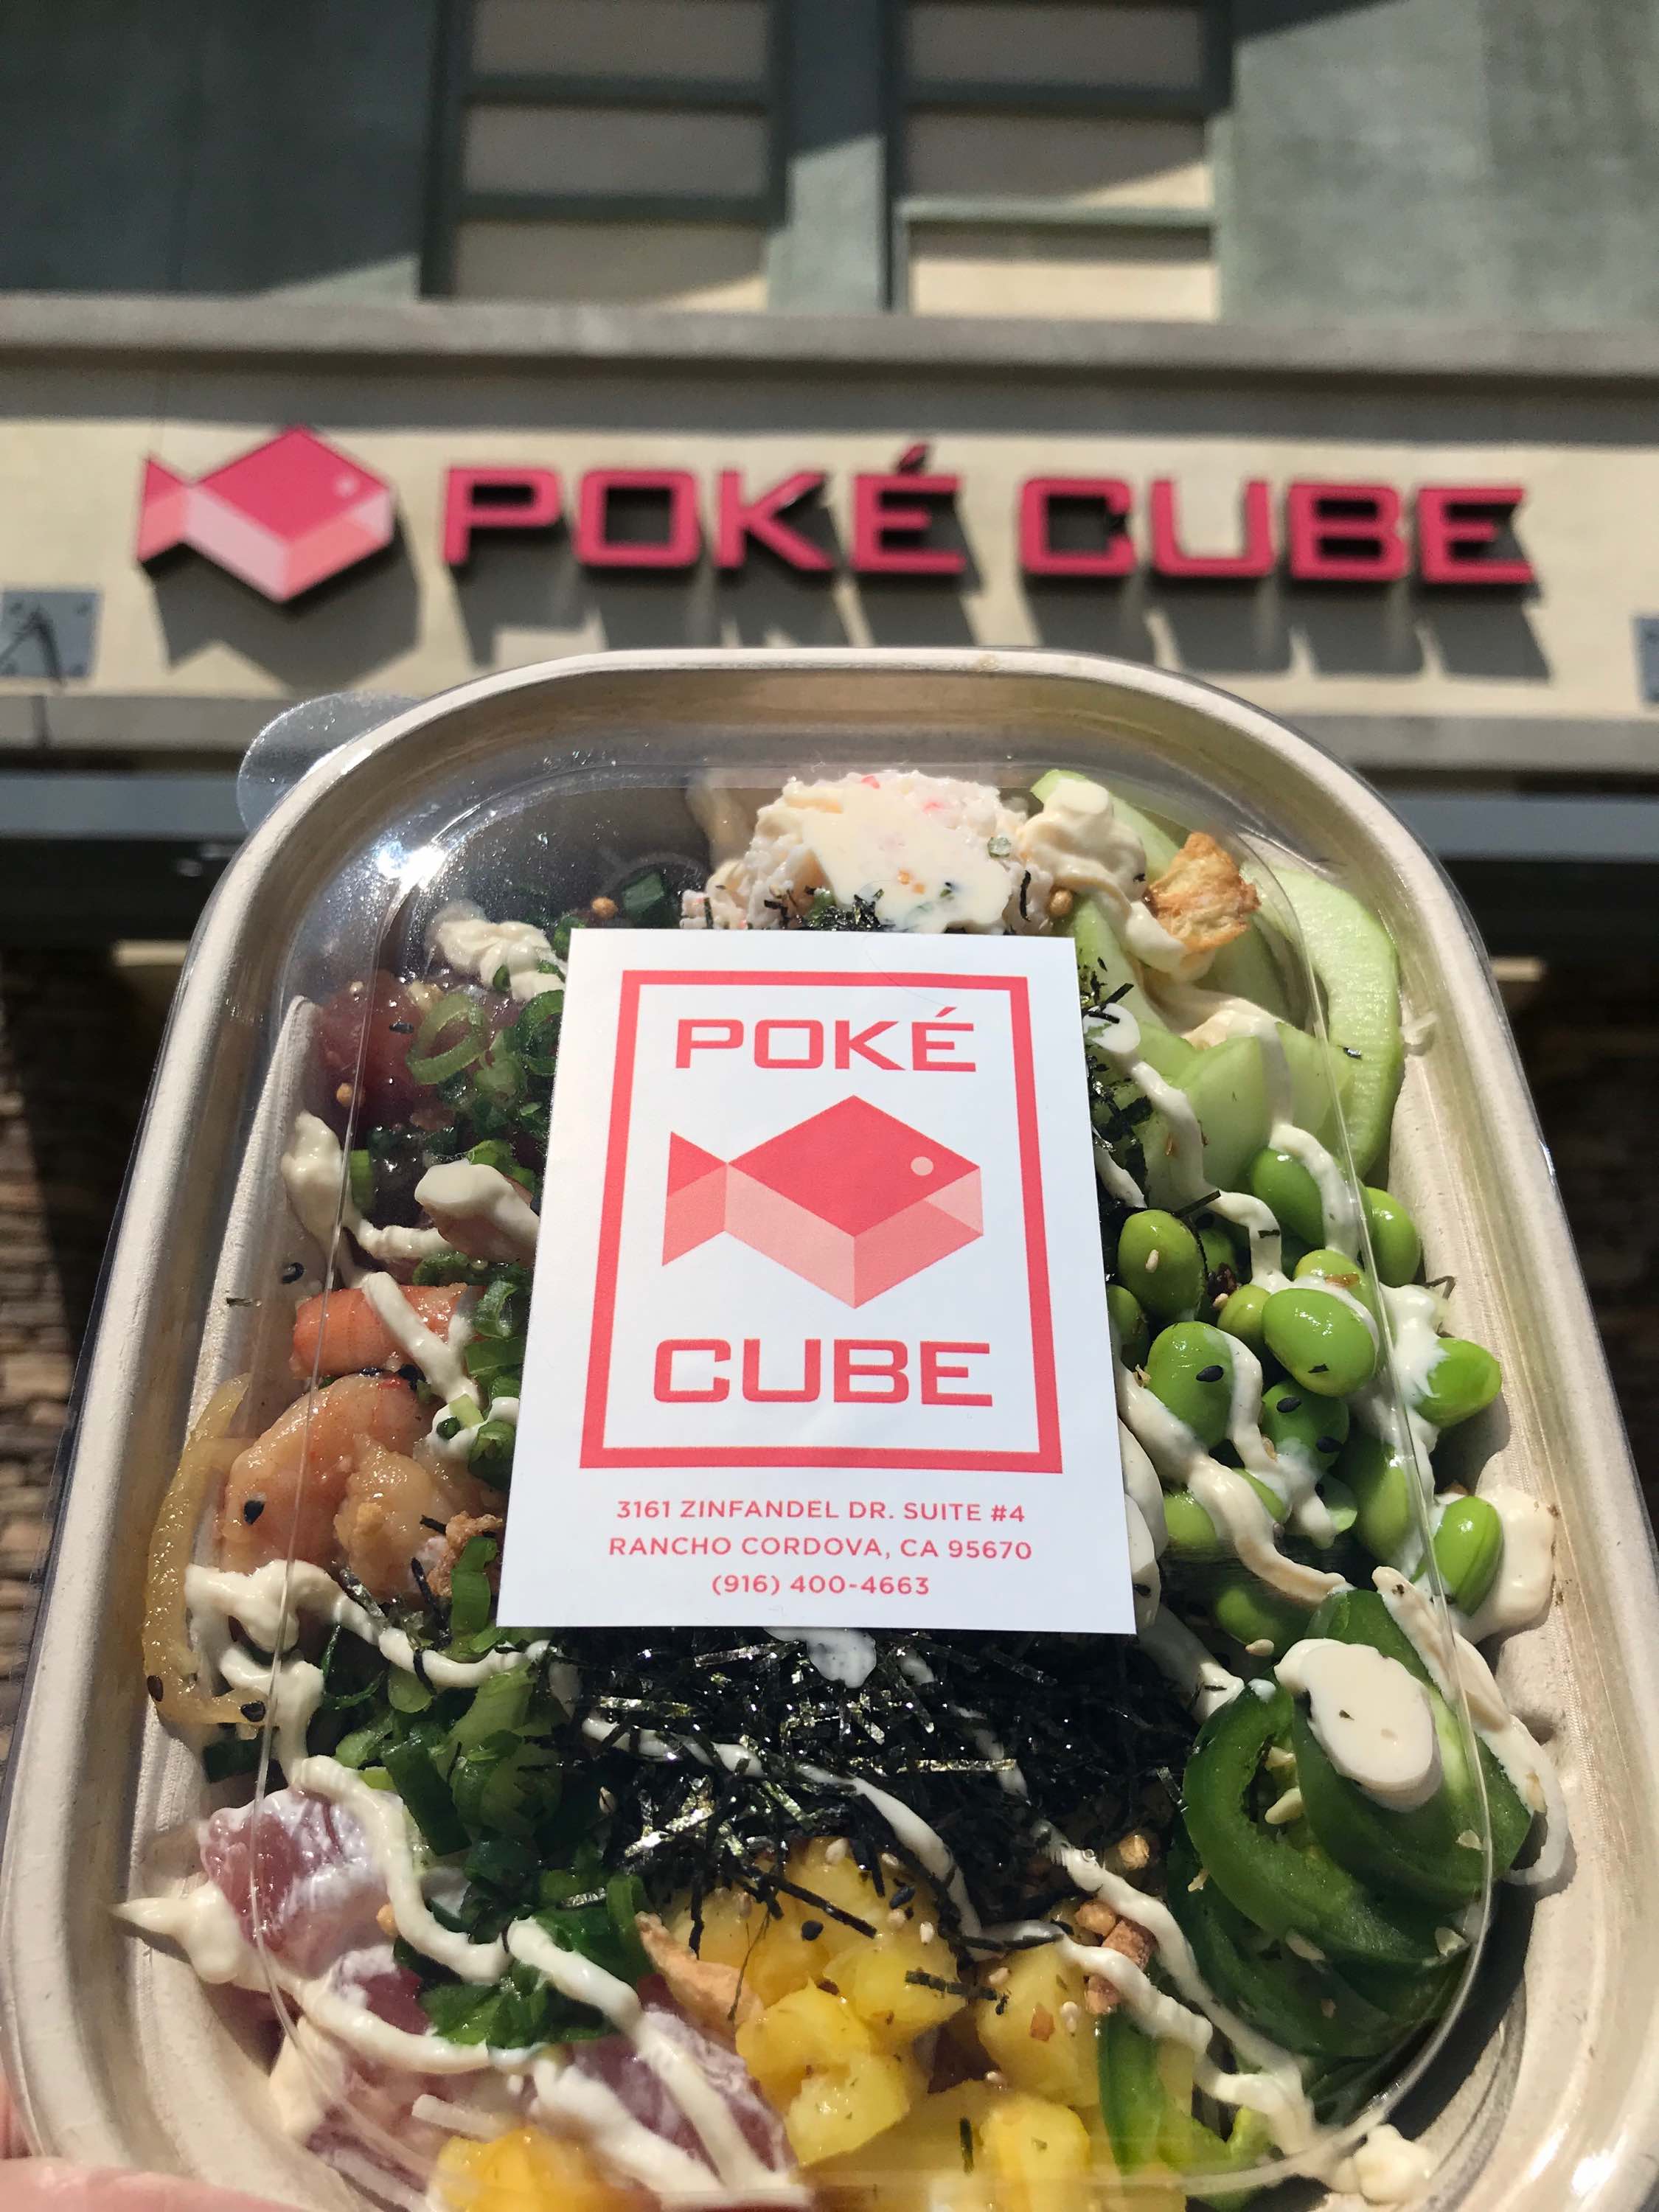 About Online Order – Poke Cube